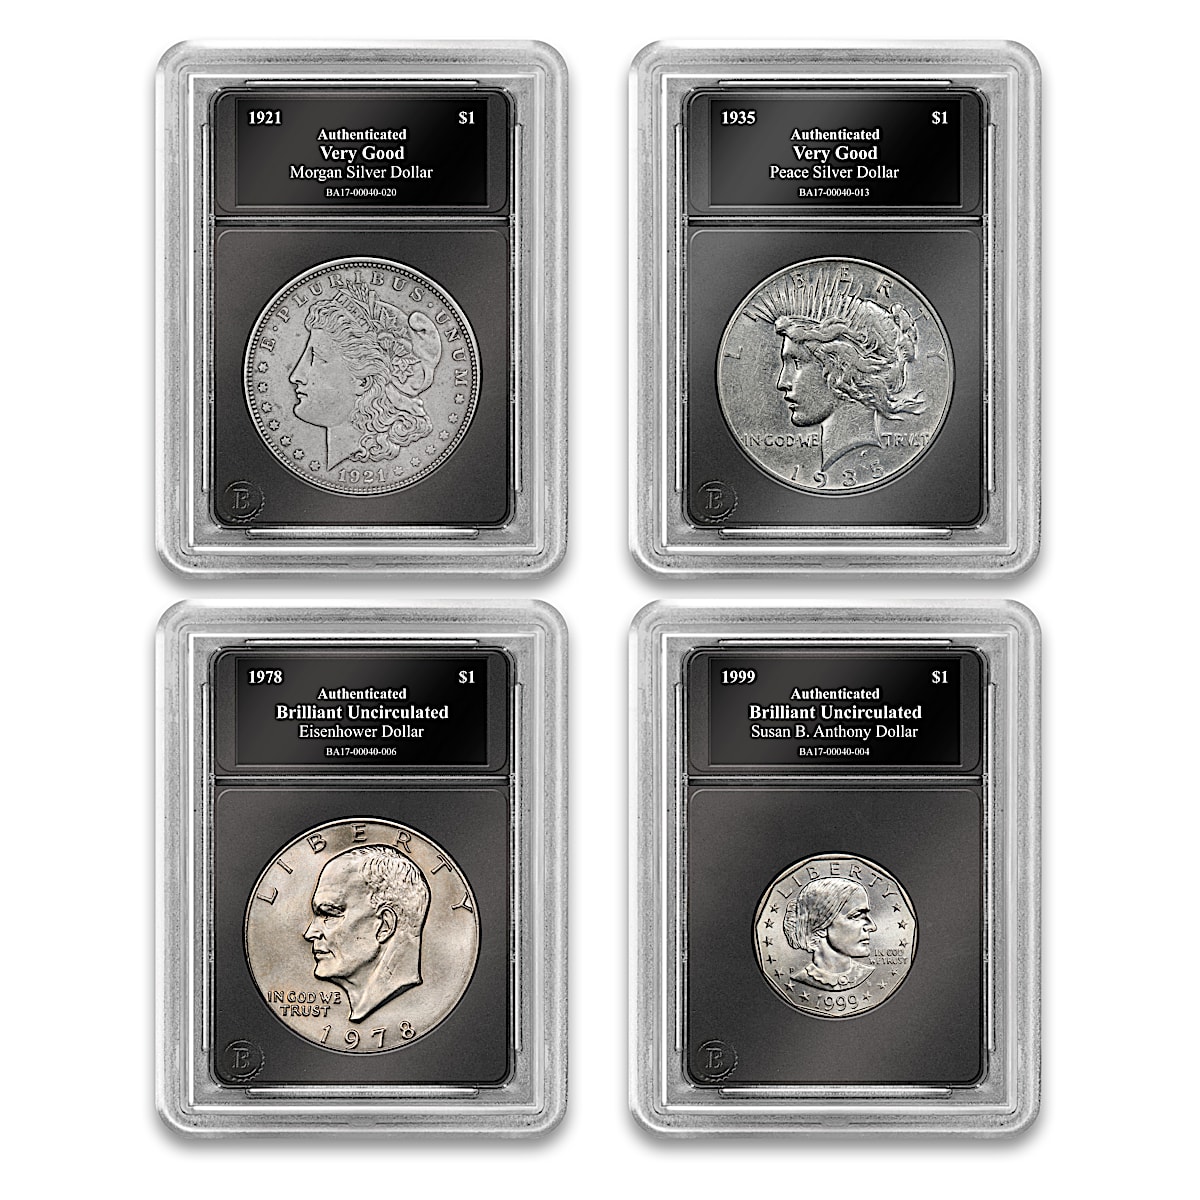 The Complete Last-Ever 20th Century Silver Dollar Coin Set